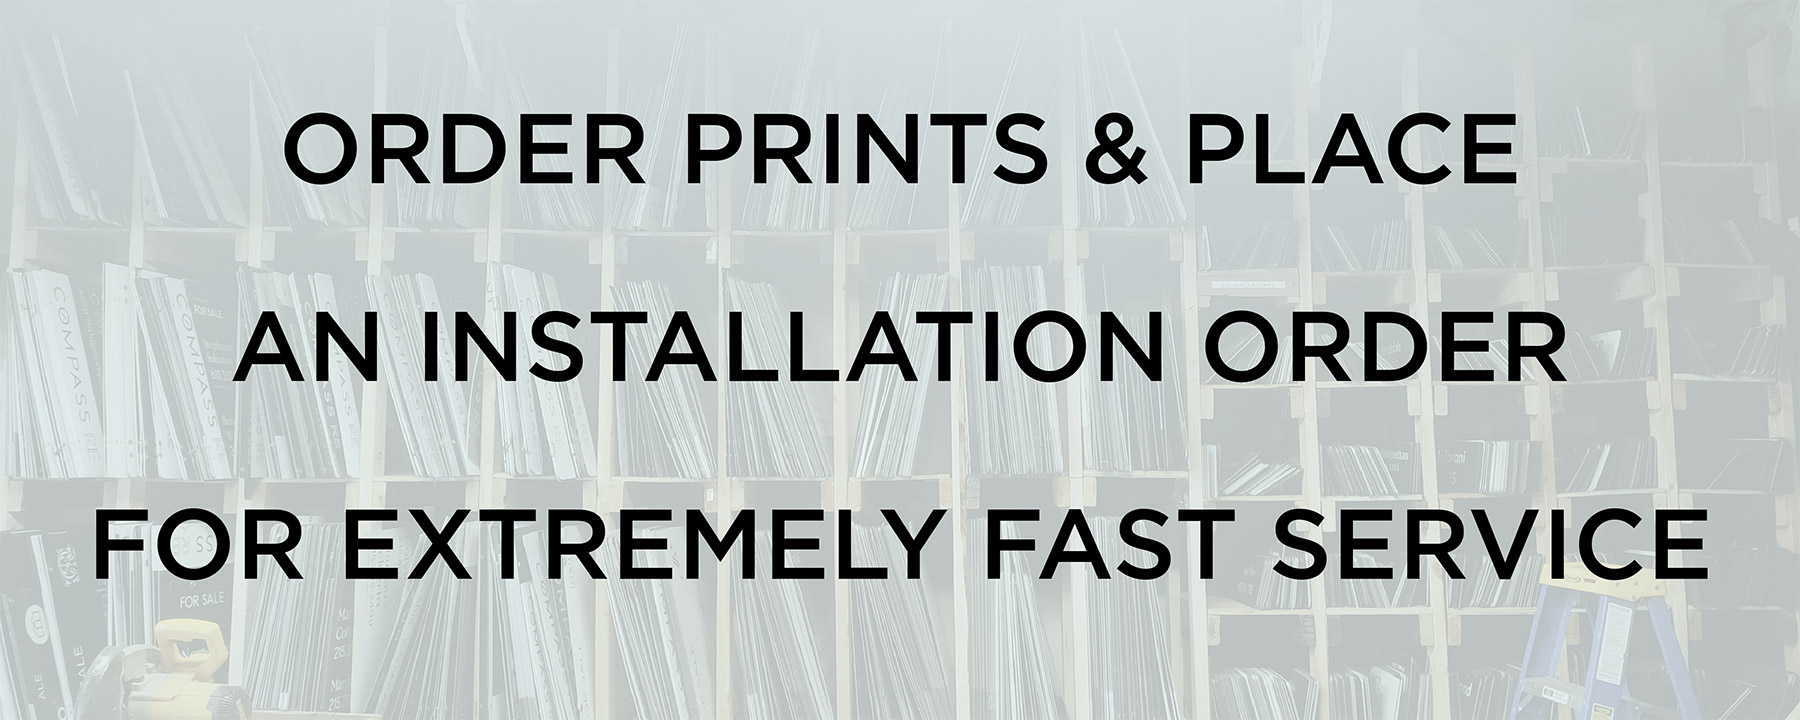 Order prints & place an installation order for extremely fast service